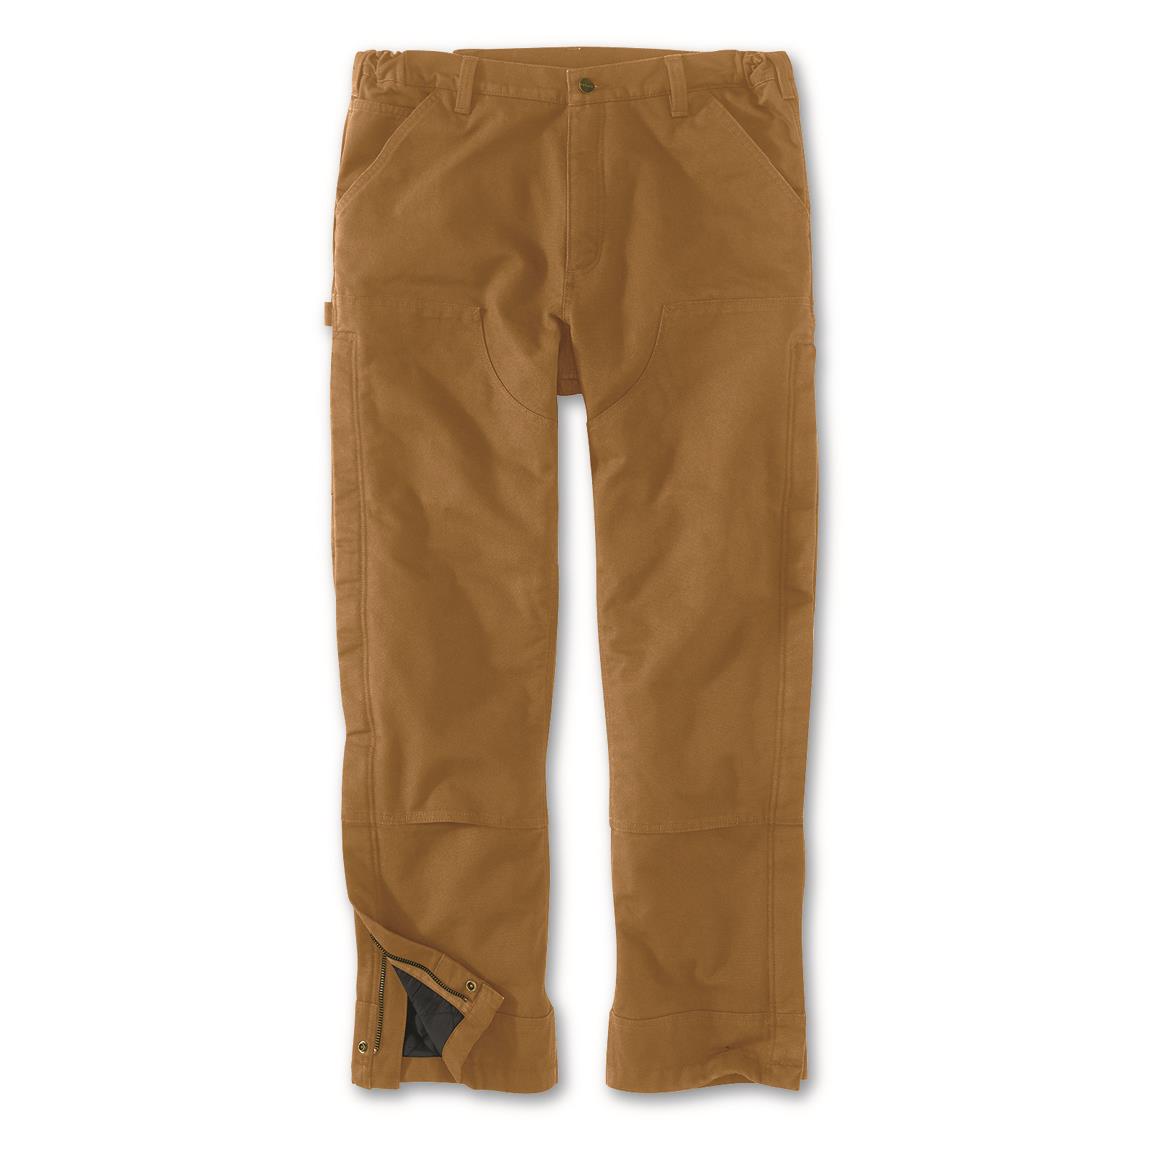 Carhartt Men's Loose Fit Washed Duck Insulated Pants, Carhartt® Brown